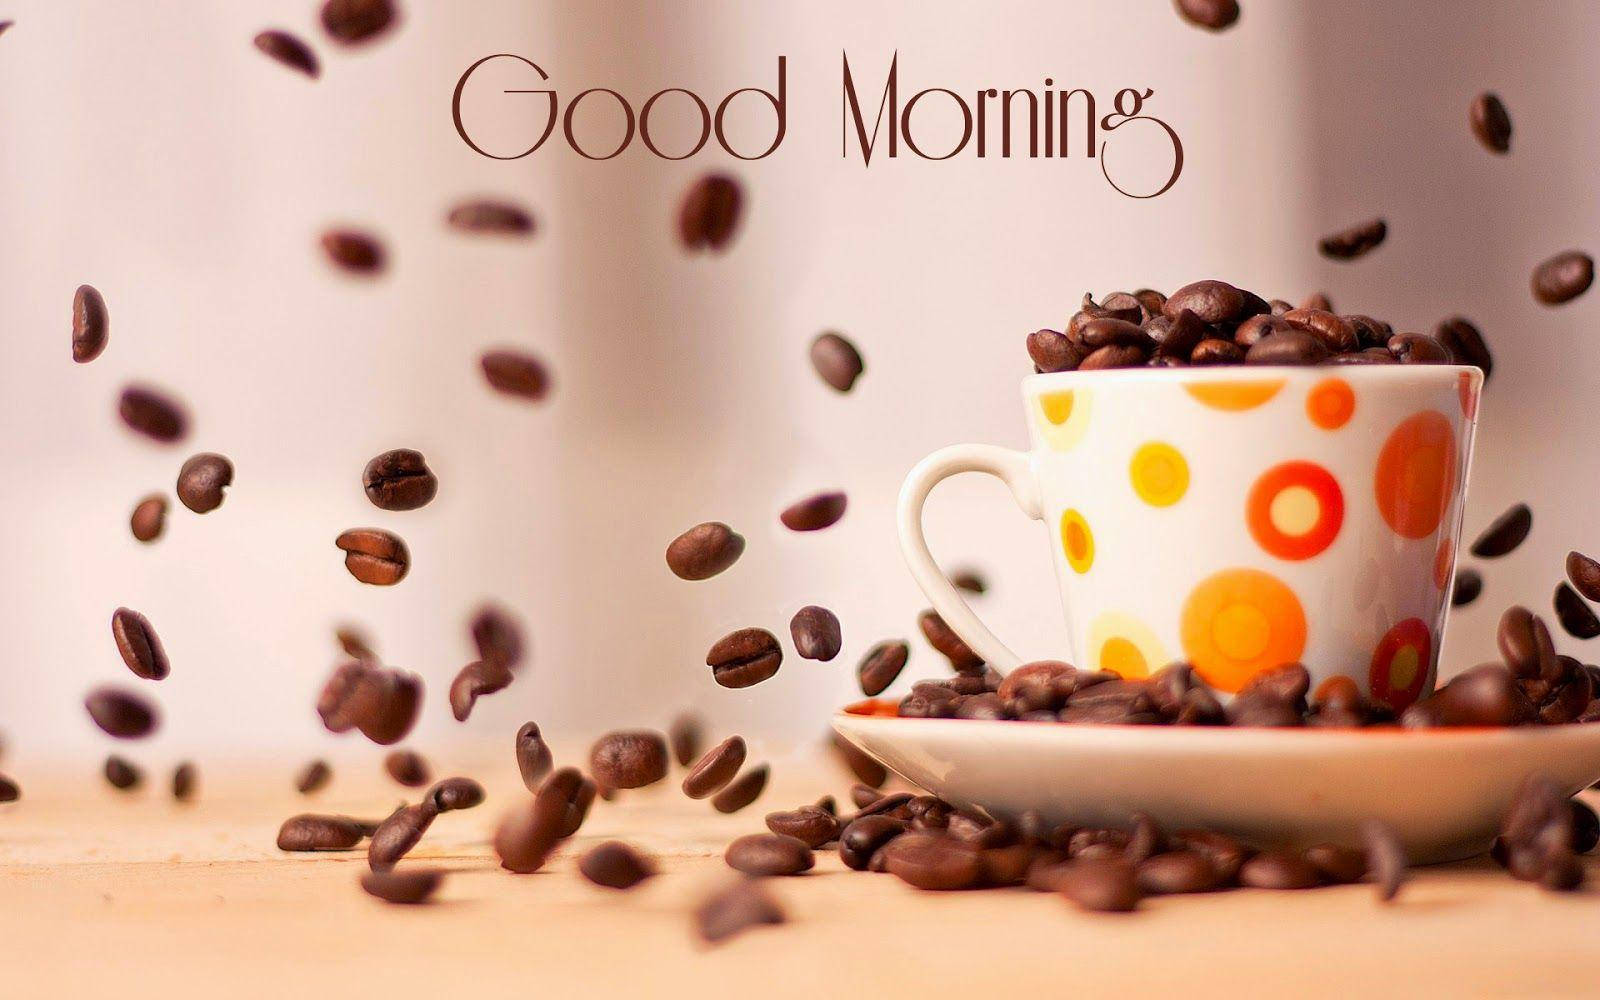 Download Good Morning Hd With Coffee Beans Wallpaper 